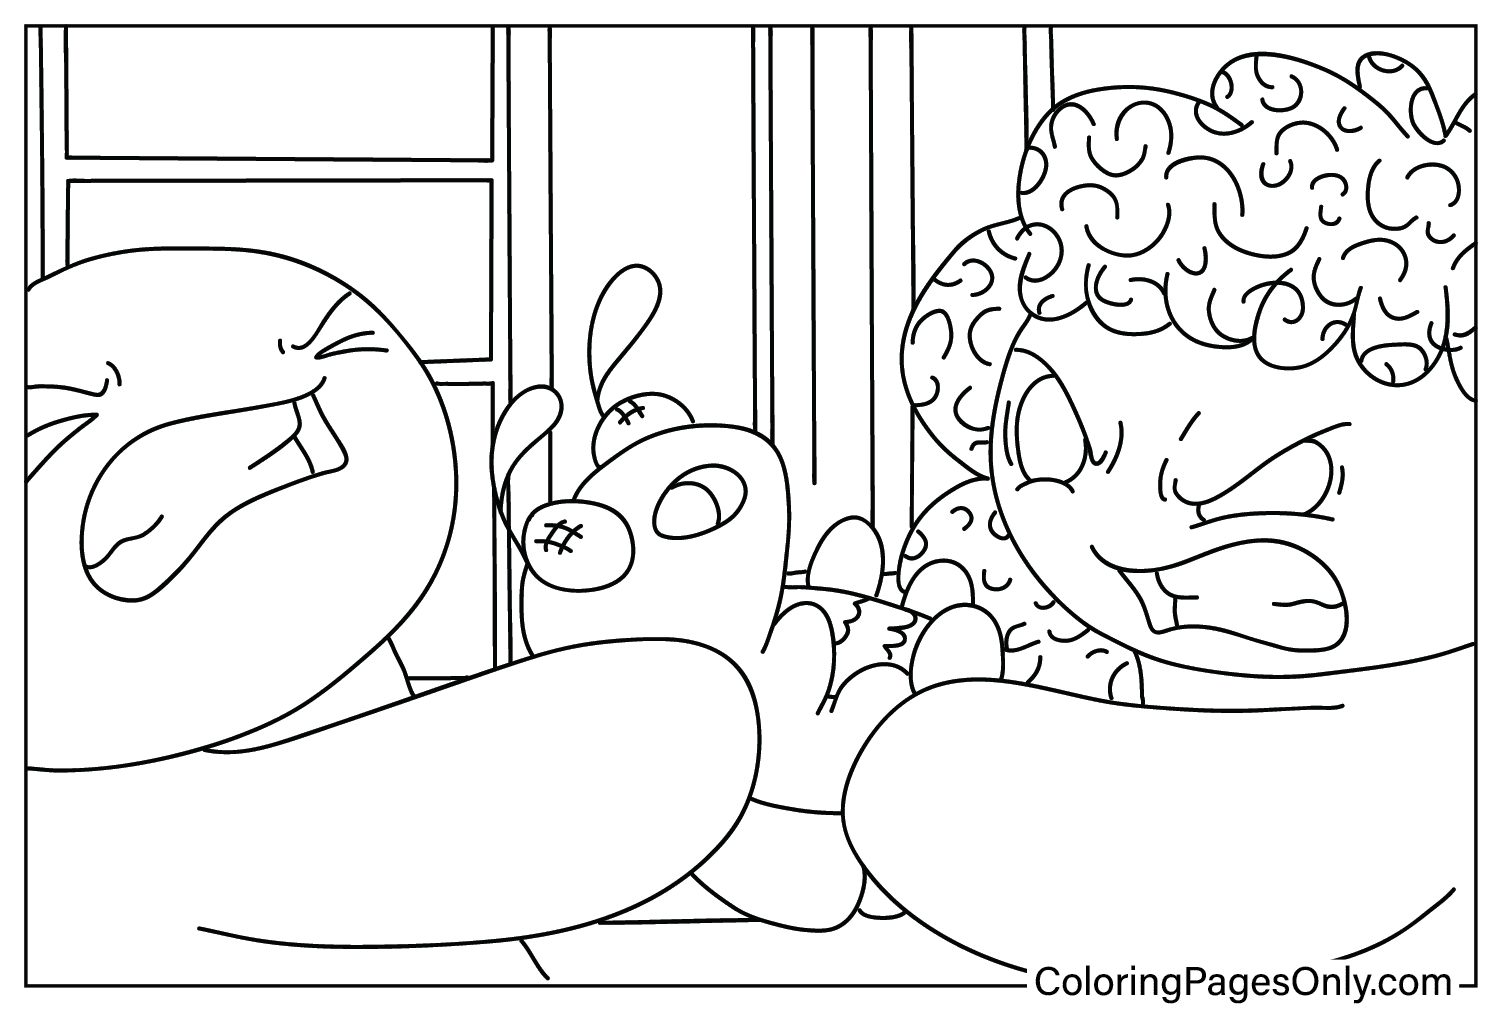 TheOdd1sOut Coloring Page Free - Free Printable Coloring Pages